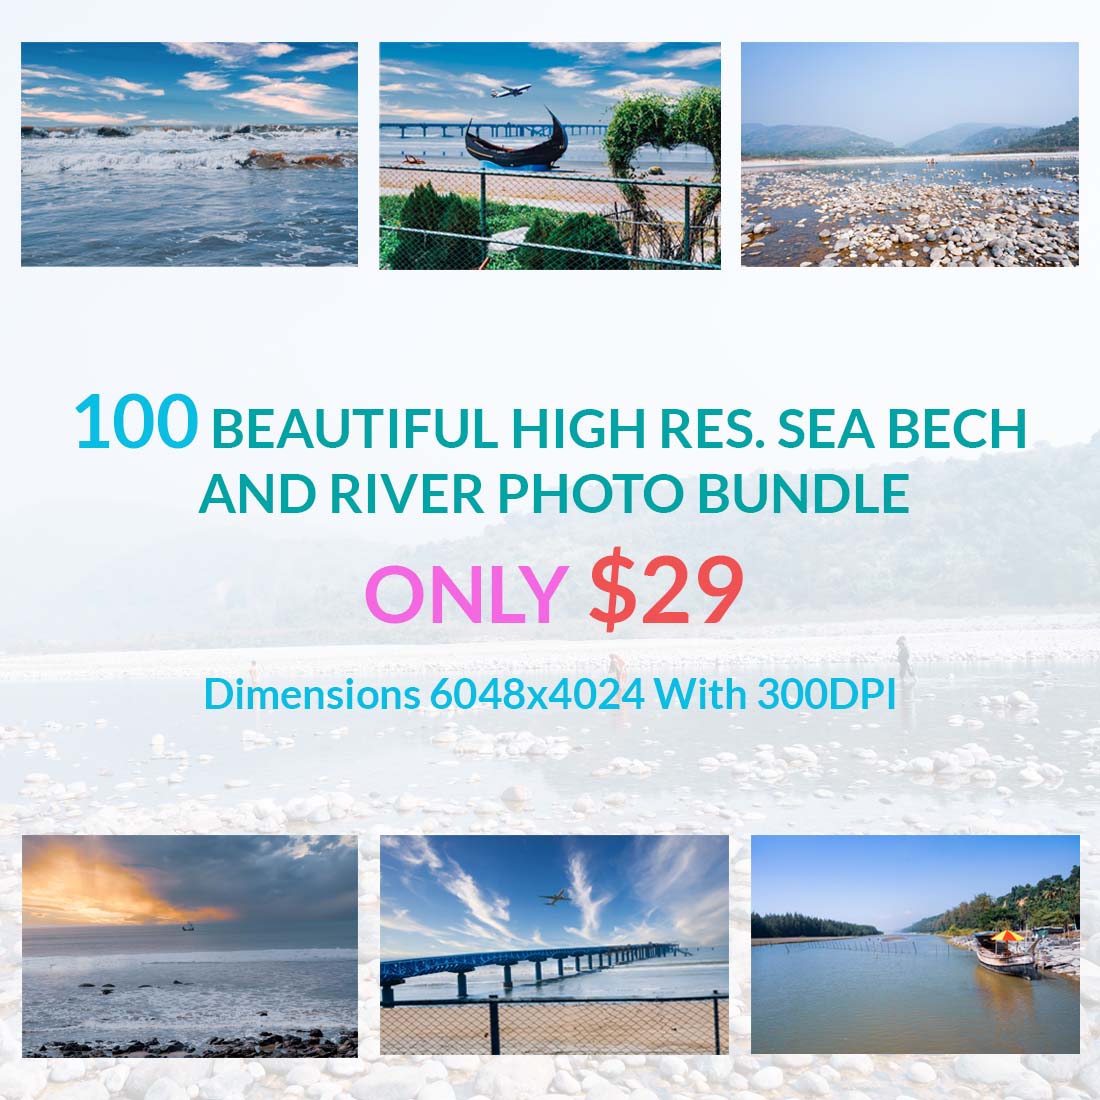 100 BEAUTIFUL HIGH RES SEA BECH AND RIVER PHOTO BUNDLE ONLY $29 cover image.